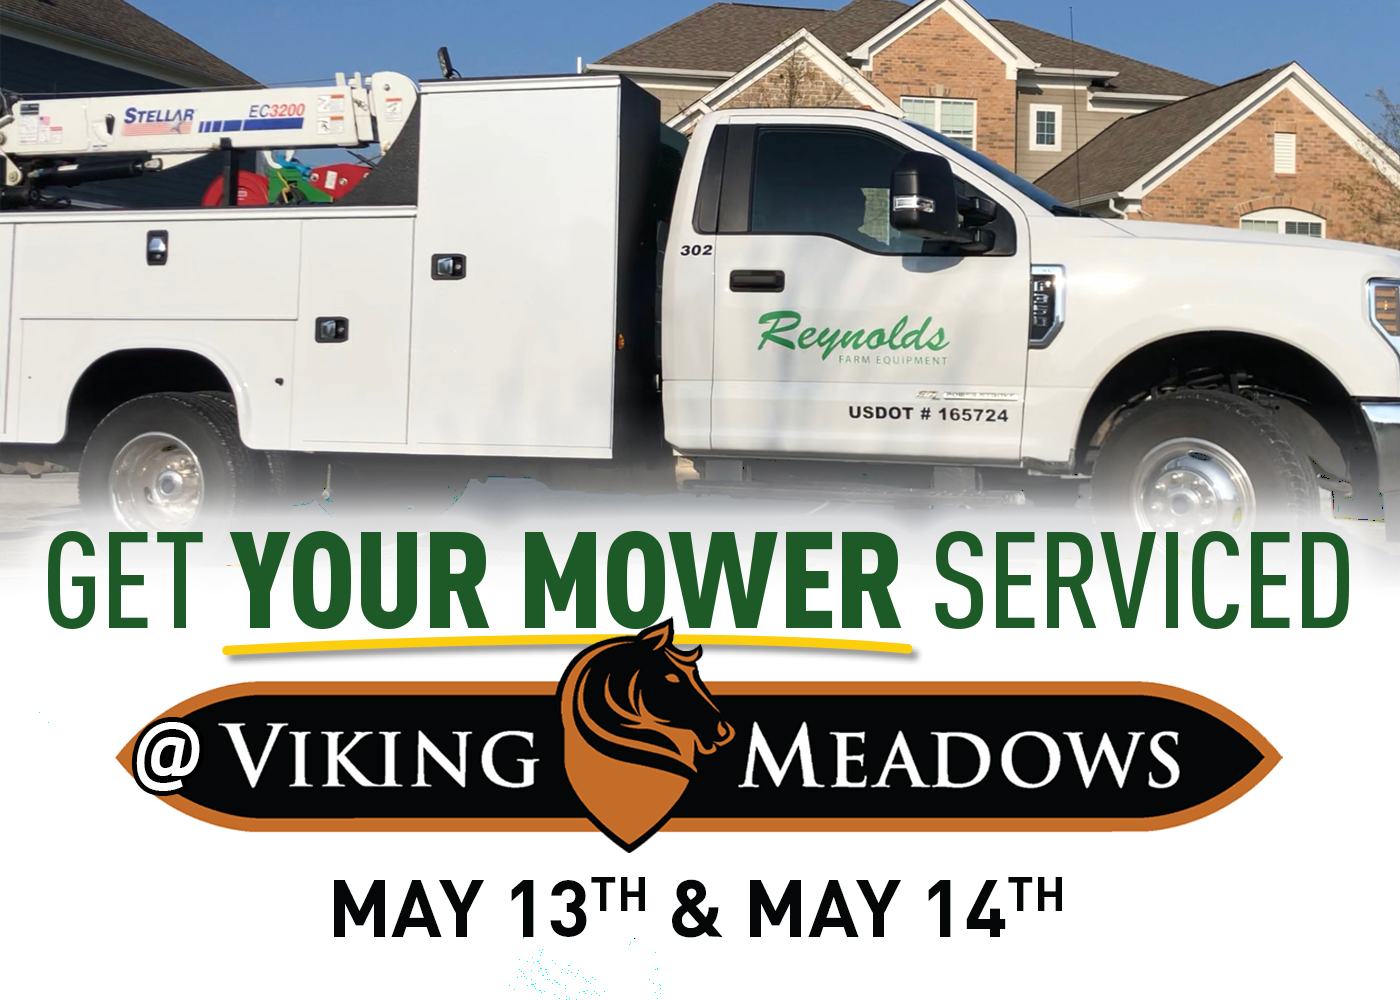 Get Your Mower Serviced at Viking Meadows